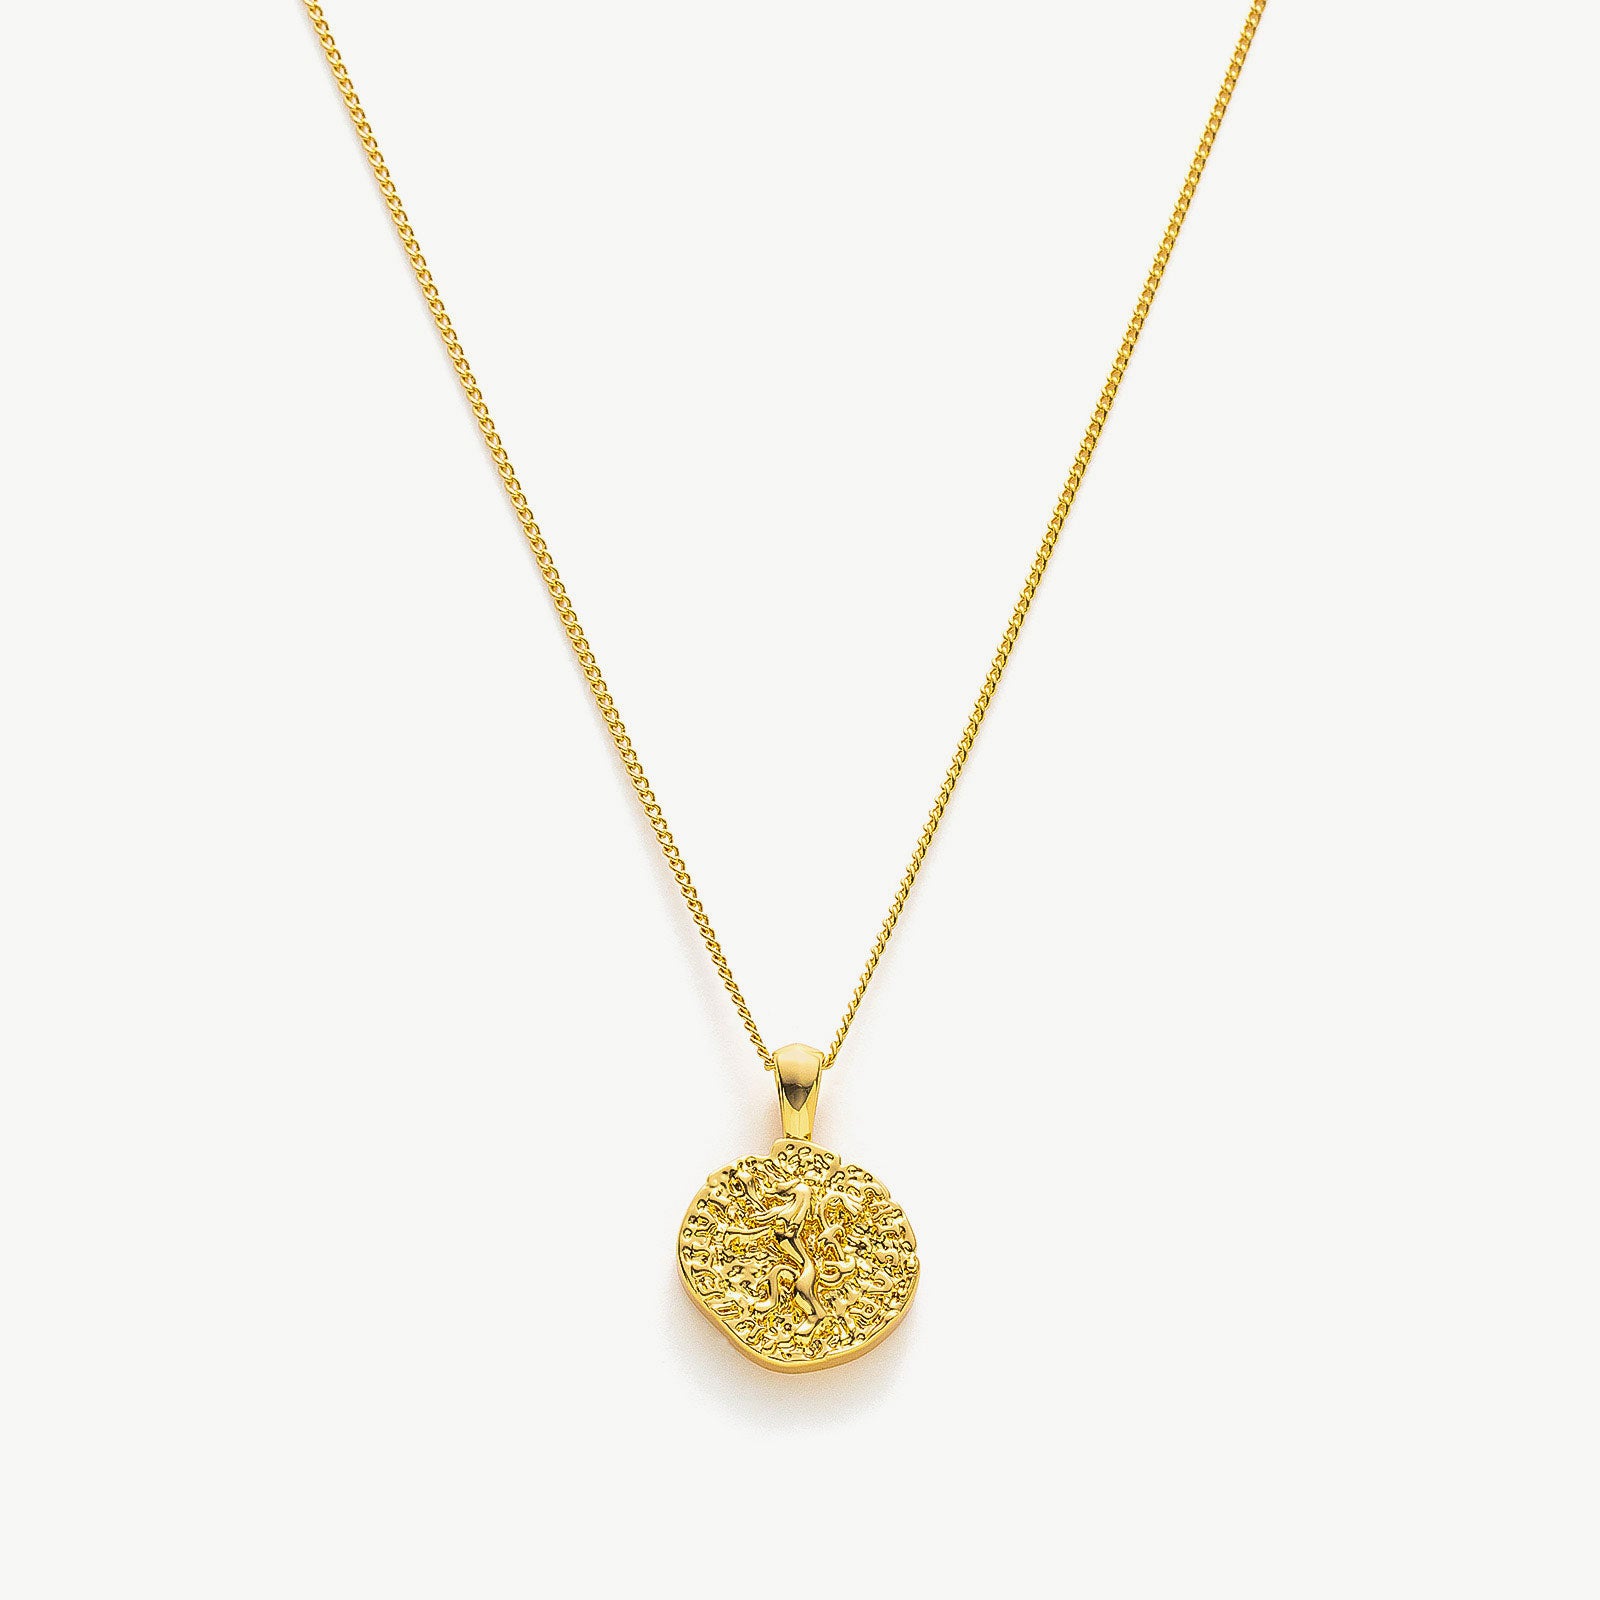 Gold Hammered Disc Pendant Necklace, a symbol of artisanal elegance, featuring a handcrafted gold hammered disc pendant on a delicate chain, adding a touch of handmade charm and sophistication to your neckline